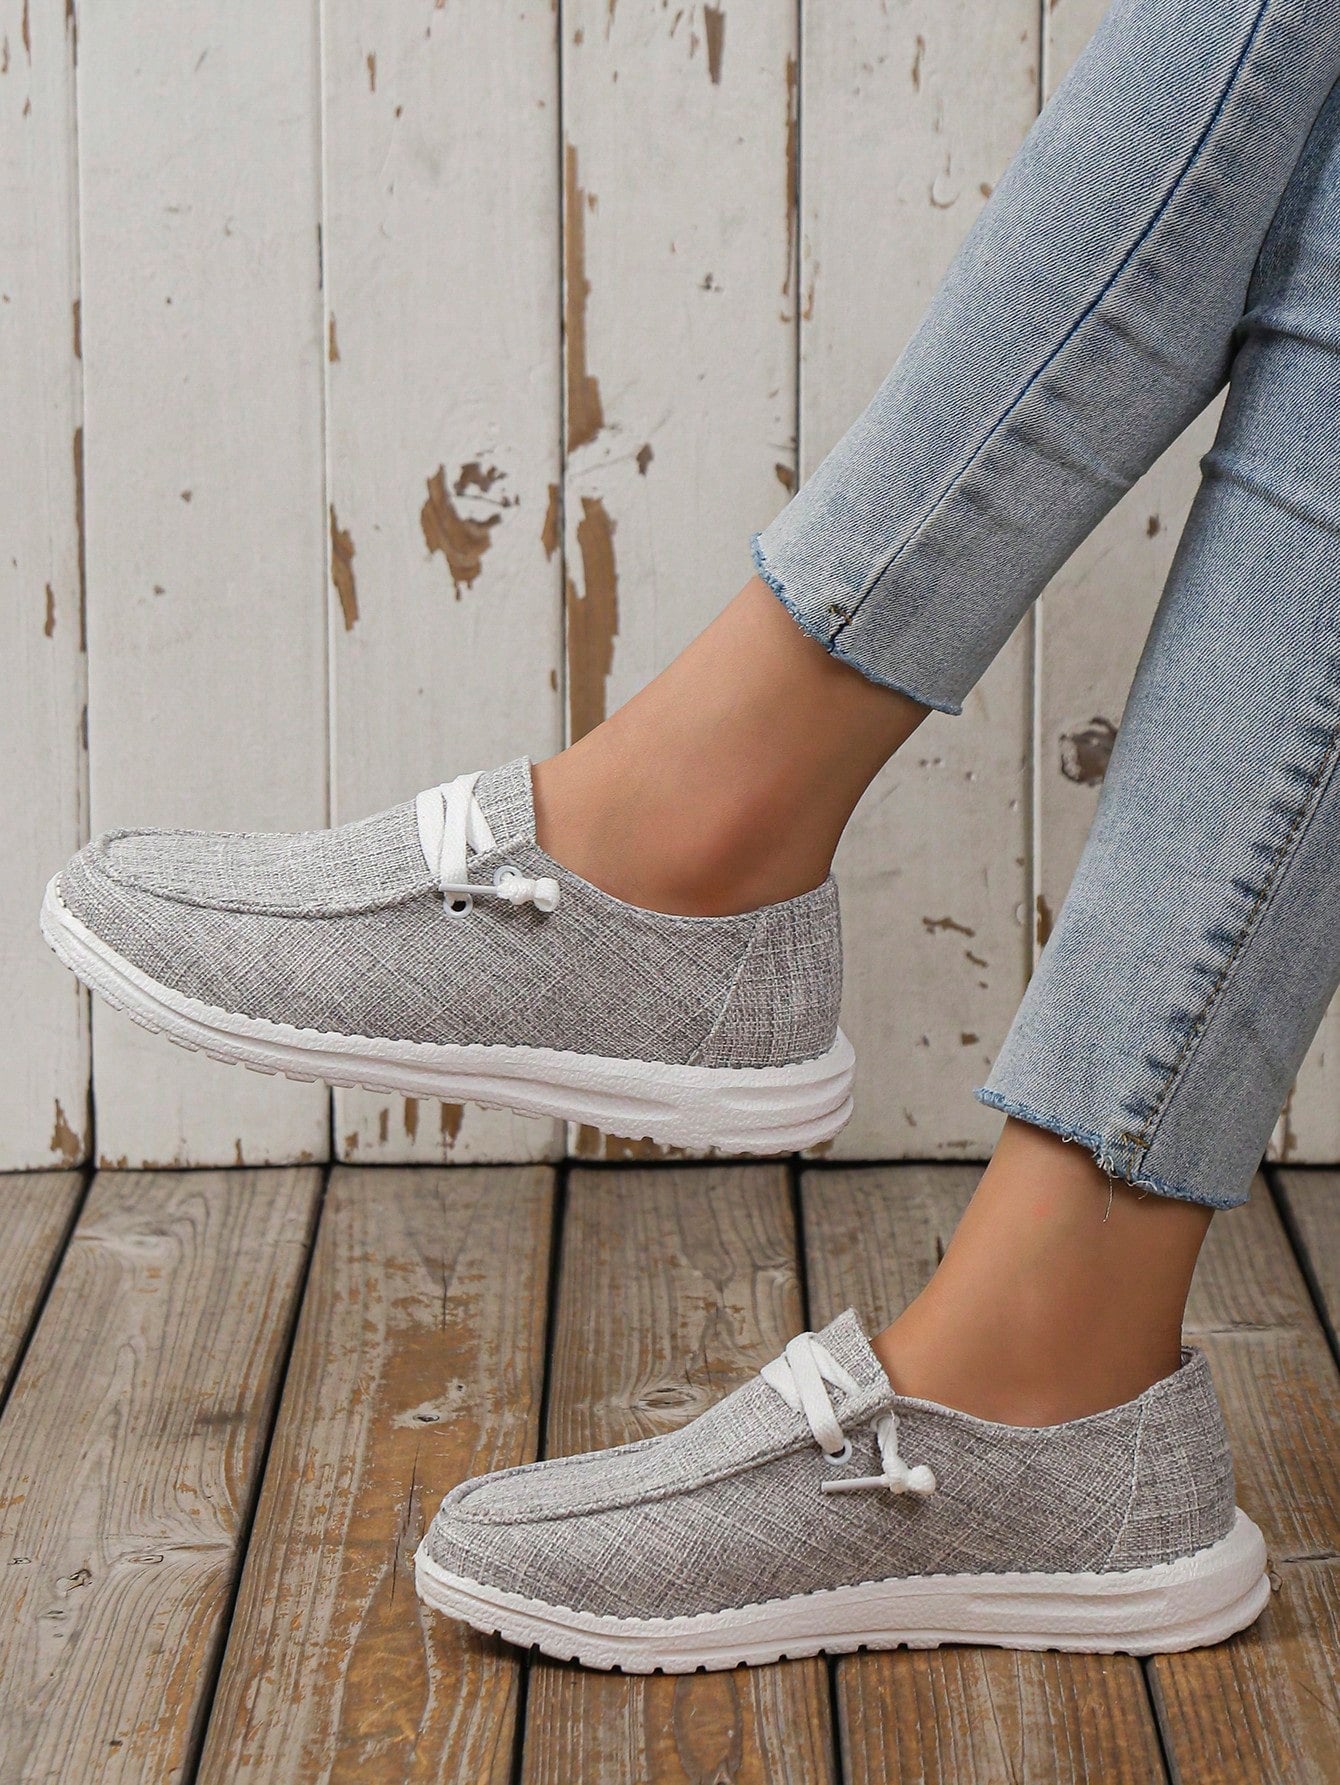 Women Casual Loafers, Slip-On Comfortable Flat Lightweight Shoes, Low-Cut Breathable Canvas Shoes For Everyday Wear-Grey-1